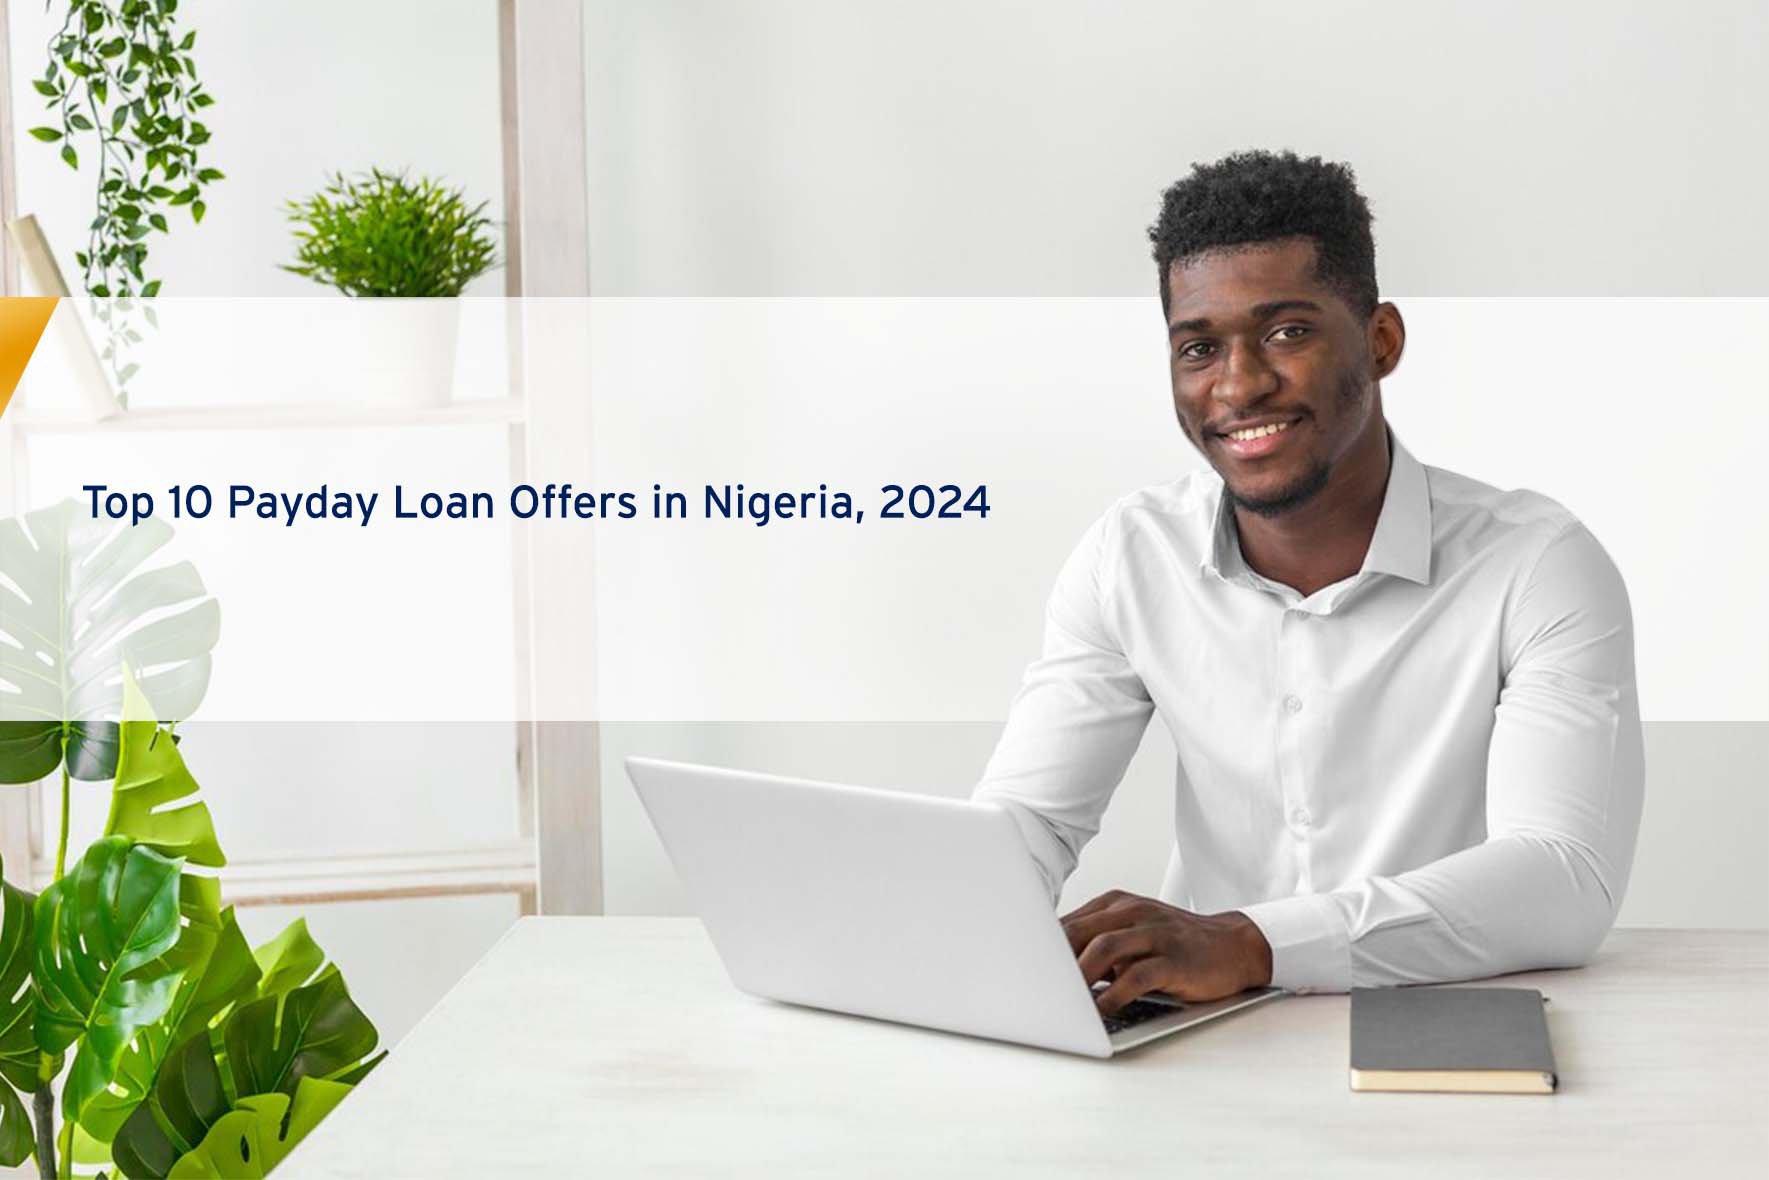 Top 10 Payday Loan Offers in Nigeria, 2024 cover